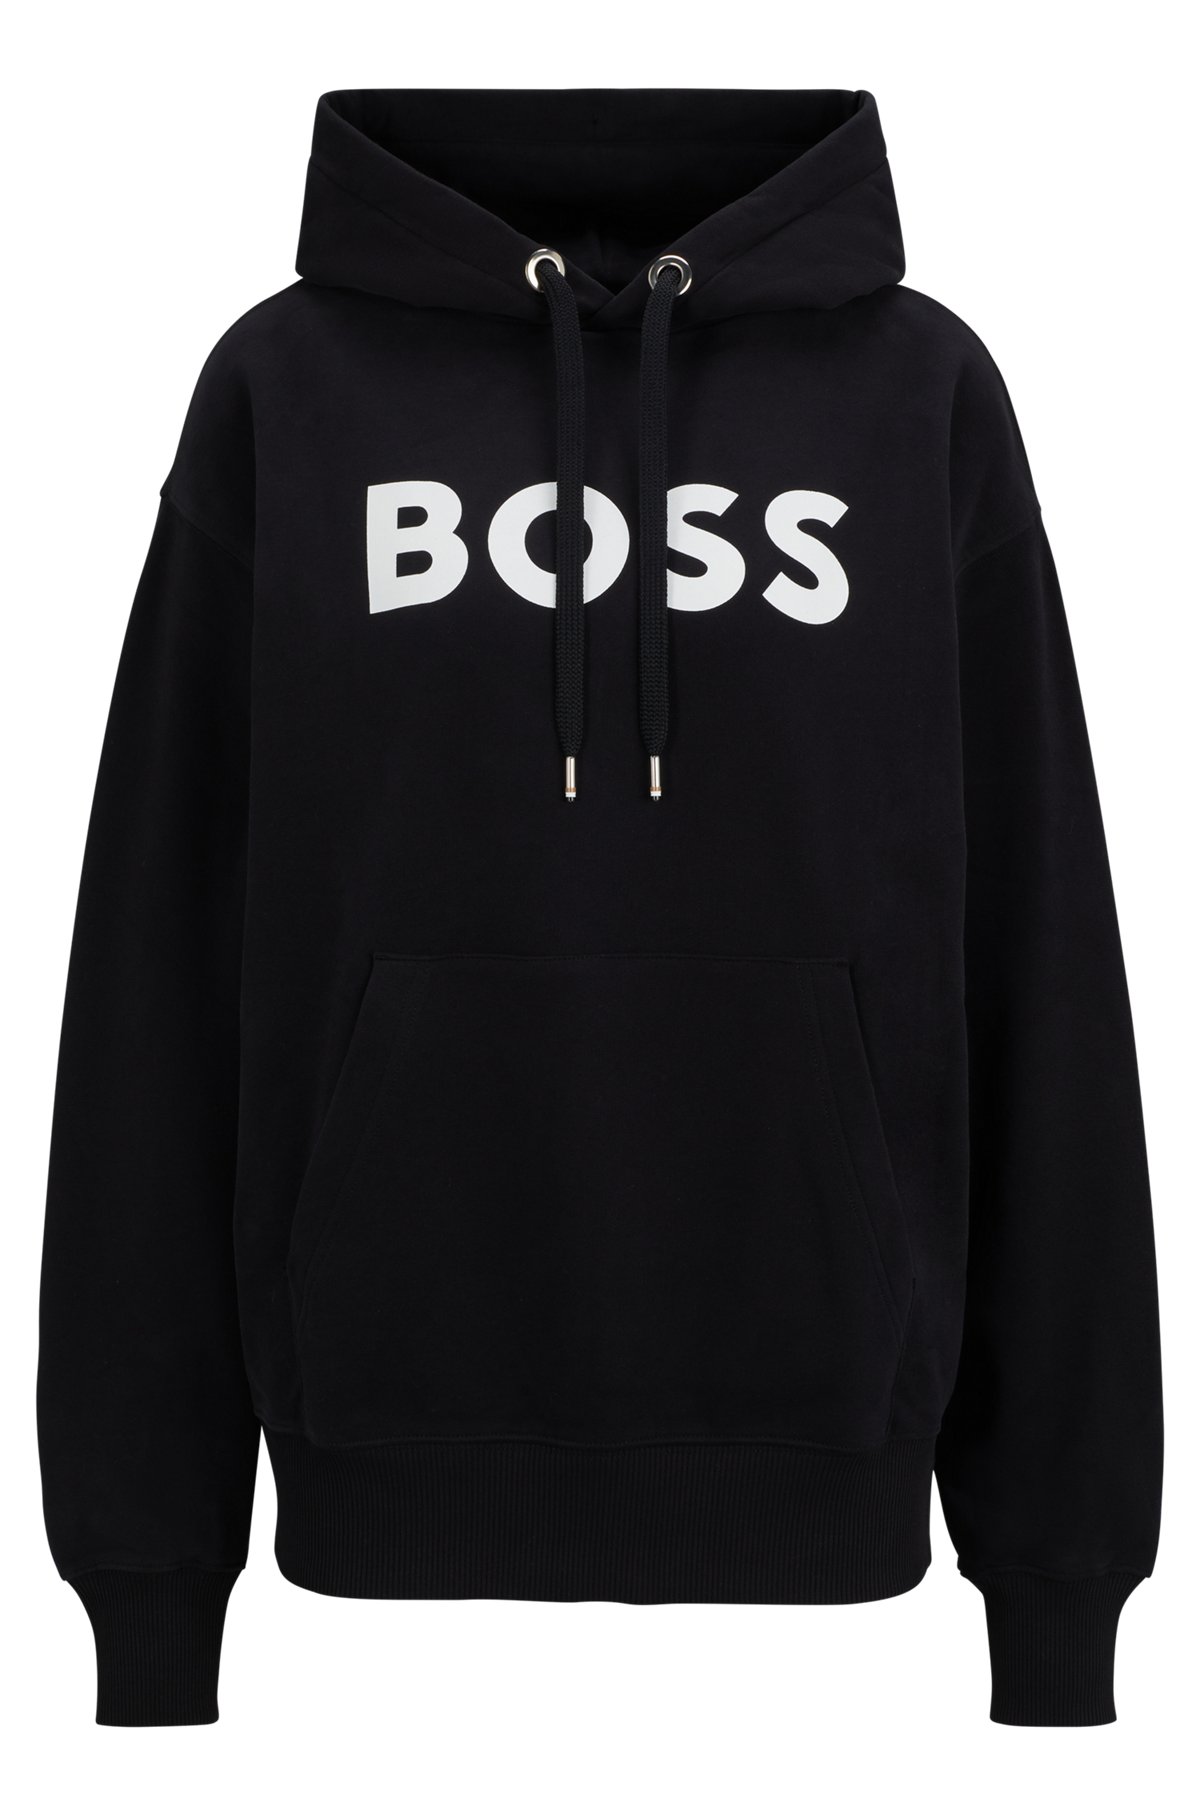 Hoodie with contrast logo, Black